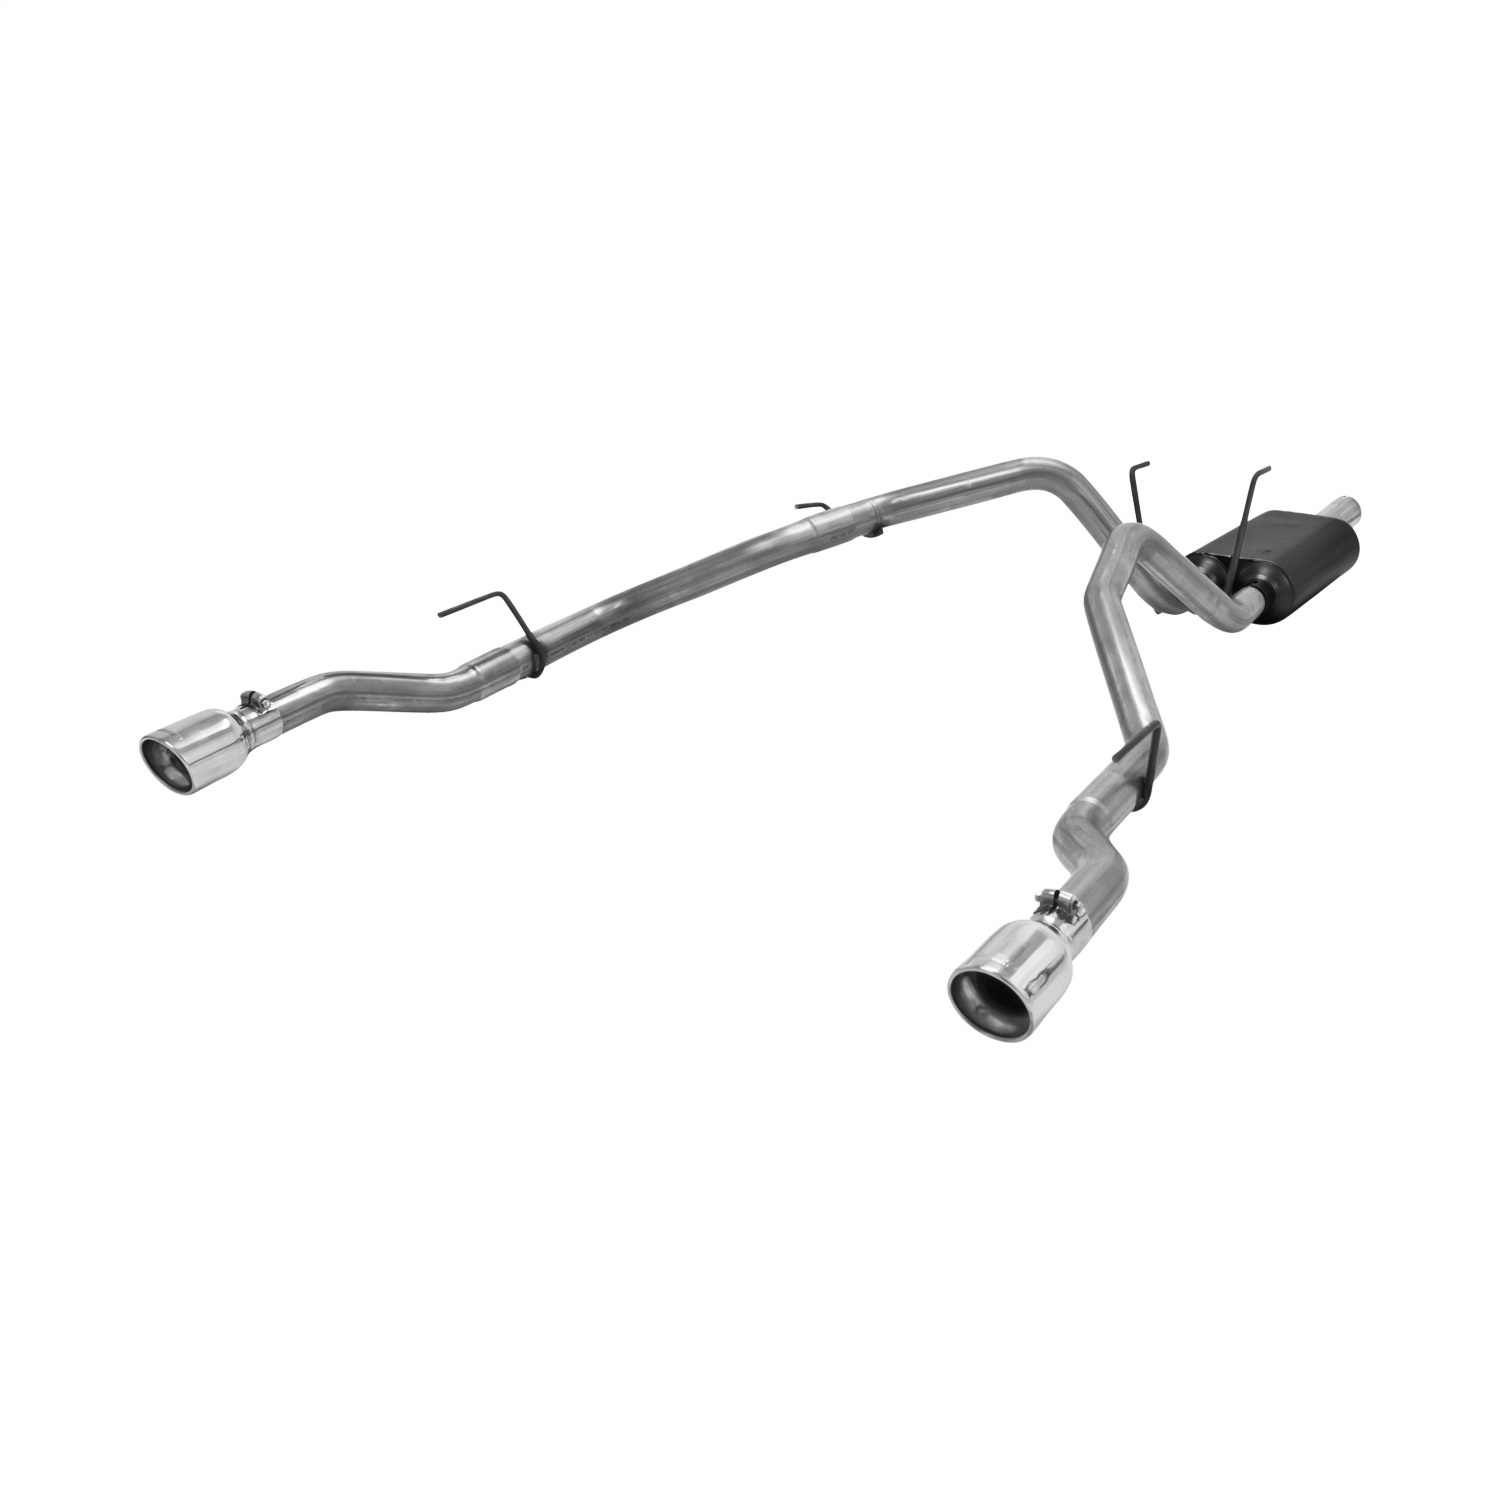 Flowmaster Flowmaster 817477 American Thunder Cat Back Exhaust System Fits 1500 Ram 1500